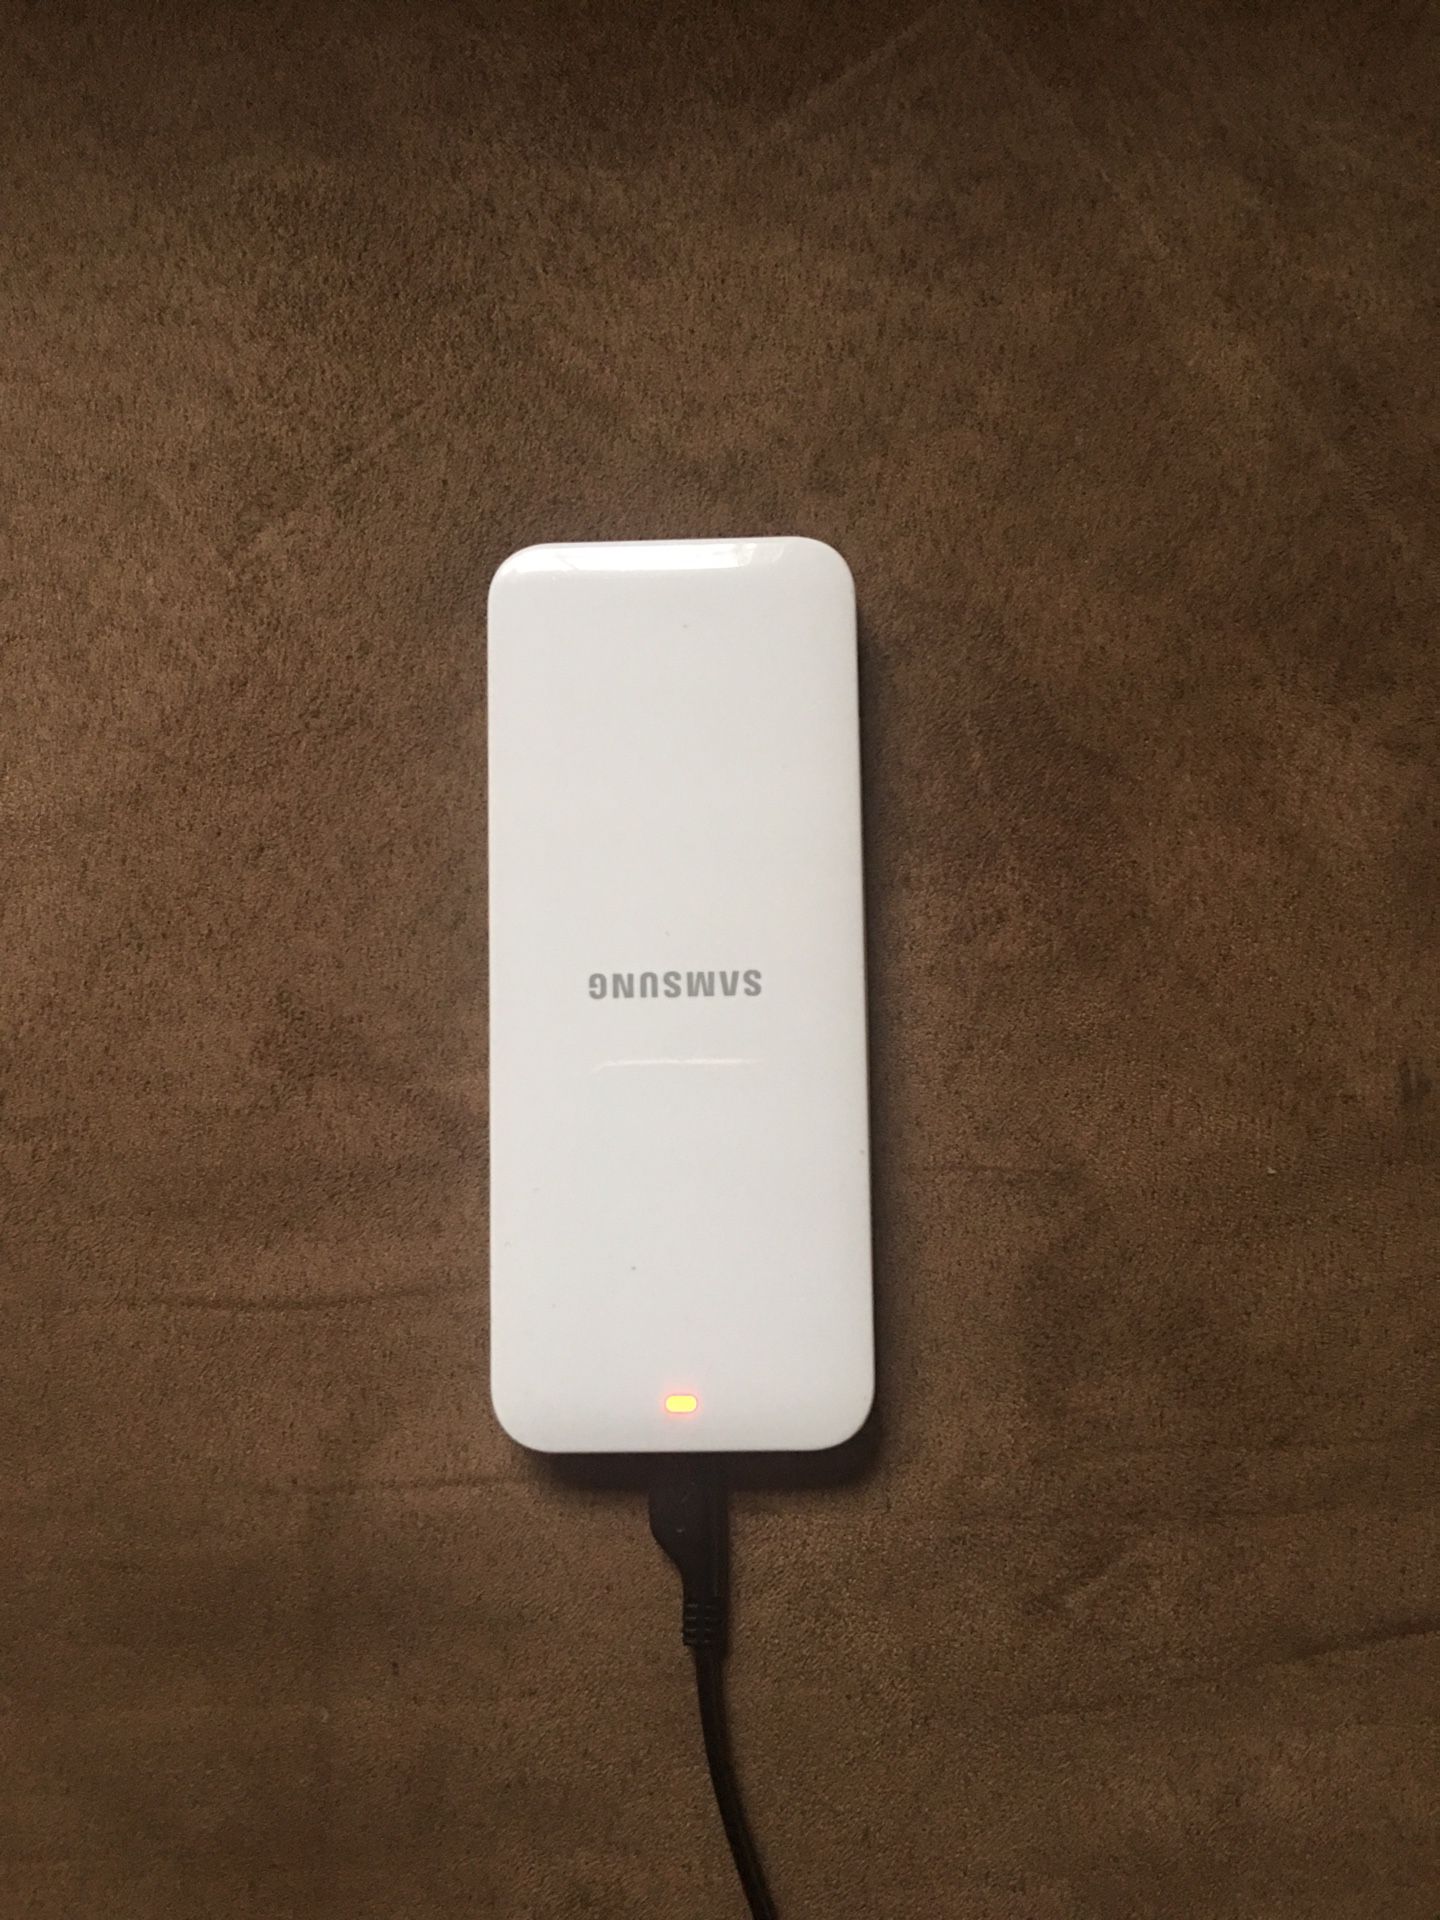 Samsung galaxy note 4 battery charger